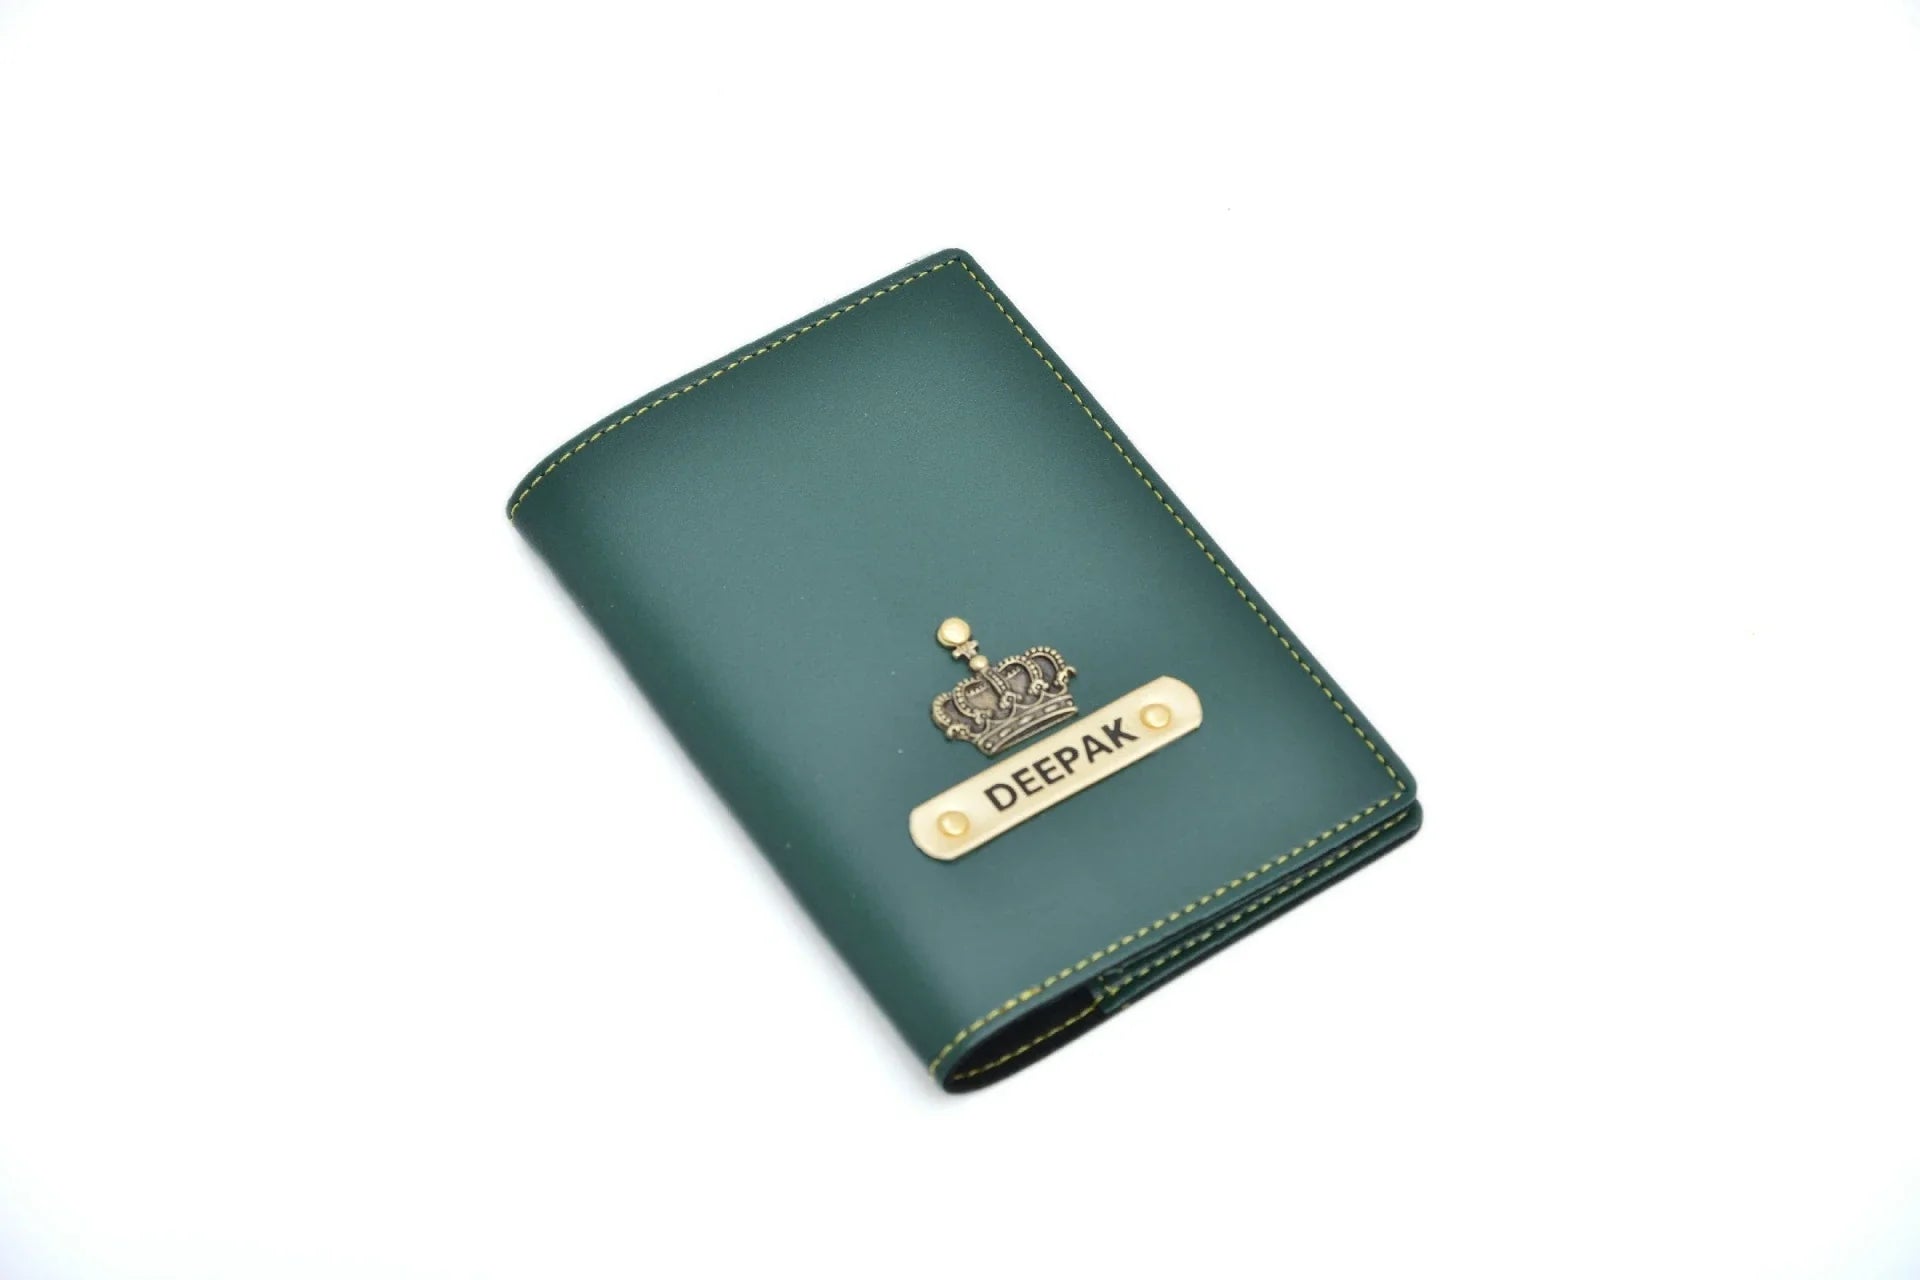 Presenting your custom-made leather passport cover with a splendid finish that makes your passport stand out! Not only is it good the see and touch, but also it protects your passport from all sorts of wear and tear. 